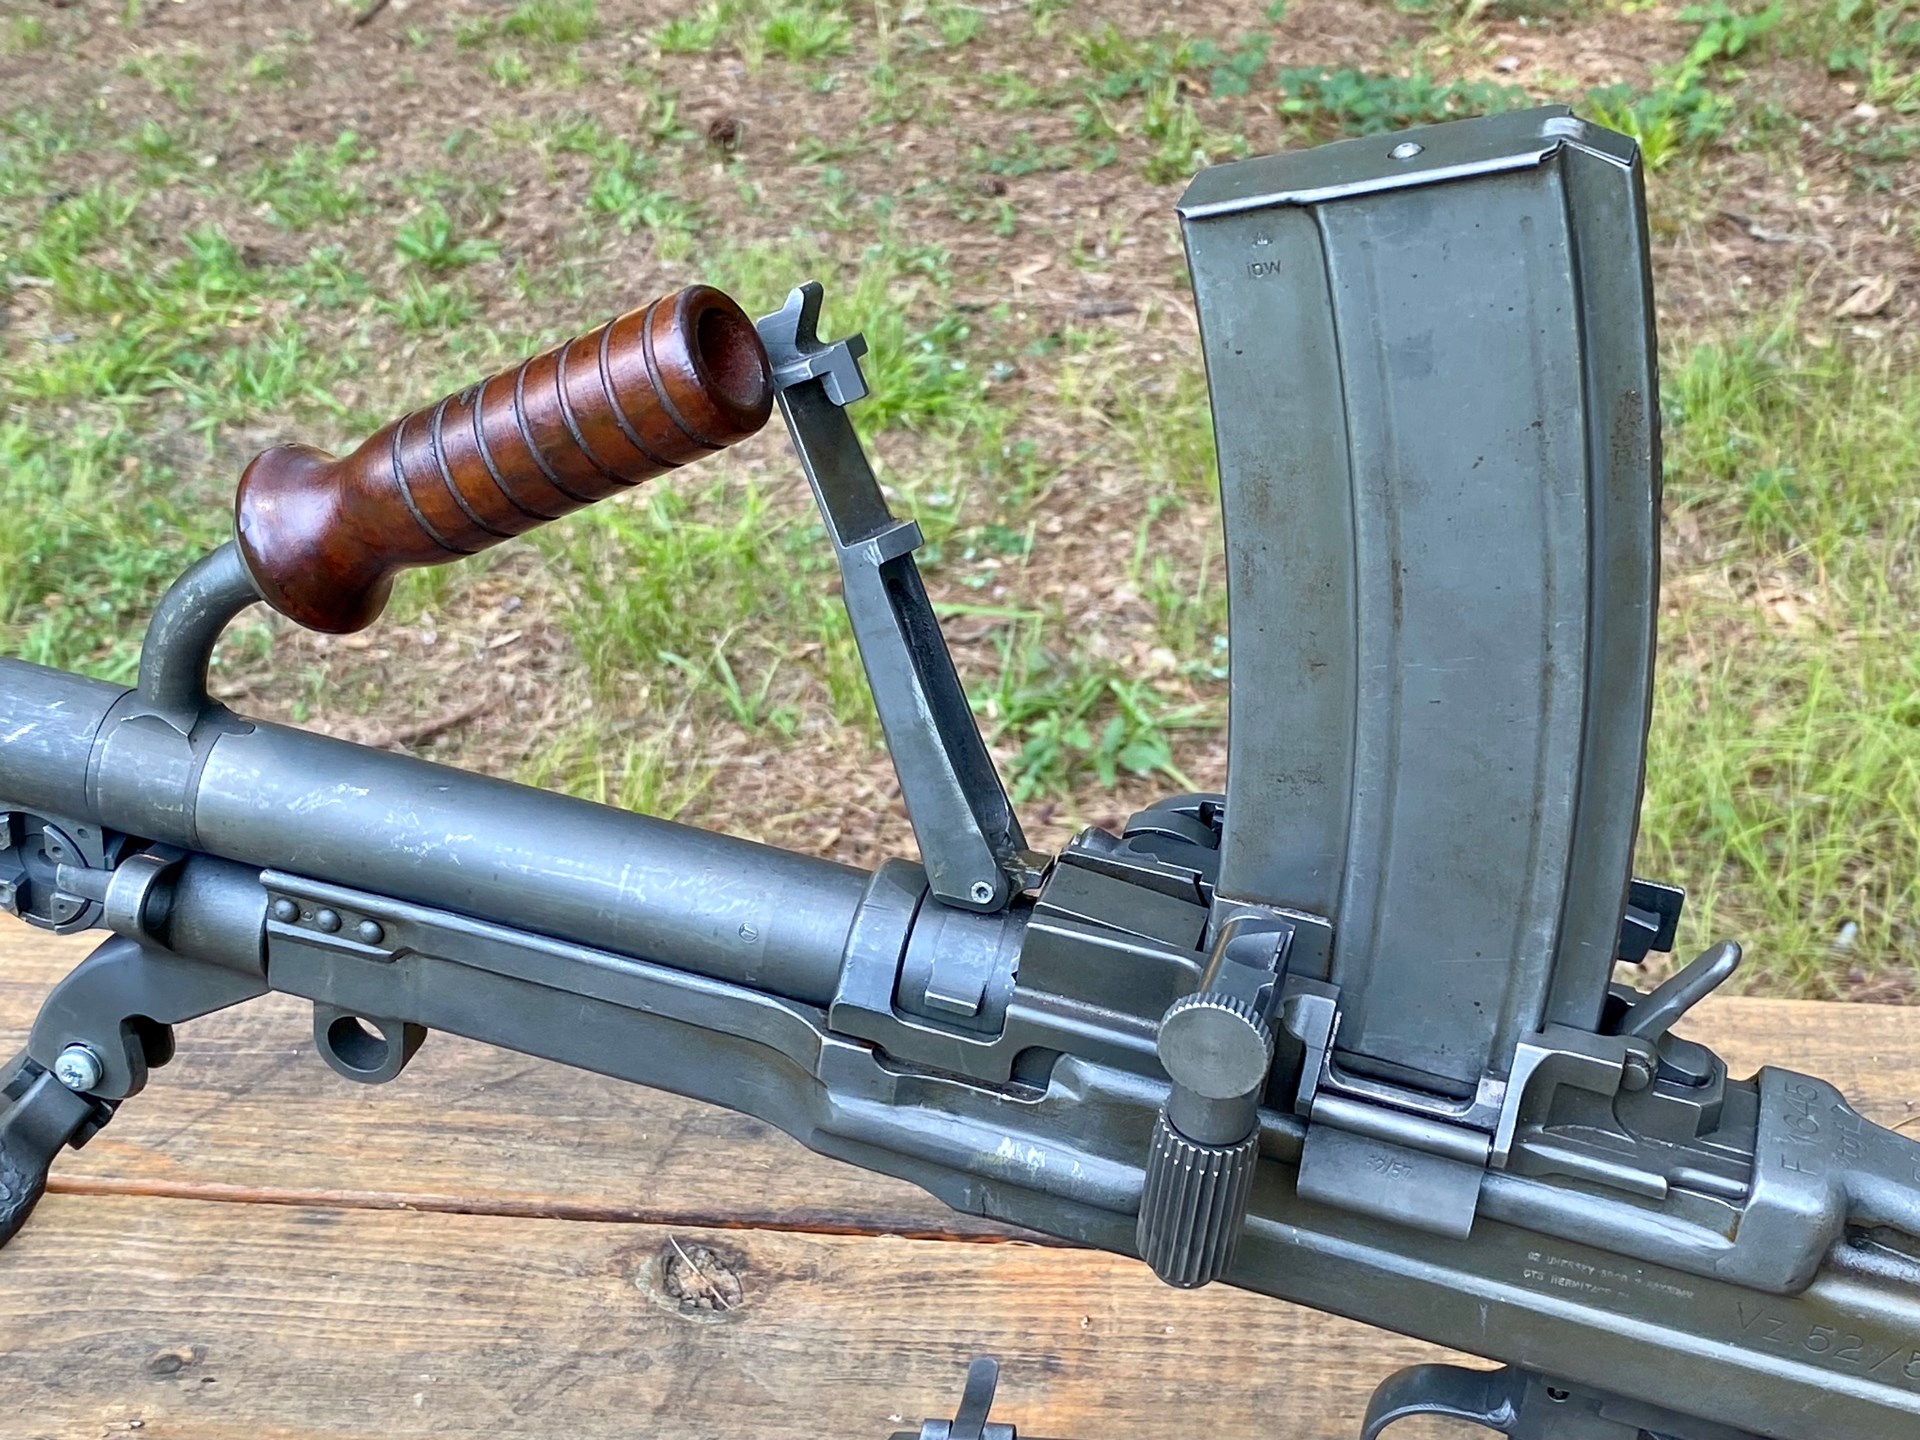 Close-up of the detachable box magazine and carry handle of a Post-86 Dealer Sample vz. 52/57 light machine gun. The magazine pictured is actually the vz. 52 type 25-round magazine for the 7.62×45 mm cartridge. The barrel release lever/magazine well cover can be clearly seen between the magazine and the carry handle. Image courtesy of Martin K.A. Morgan.